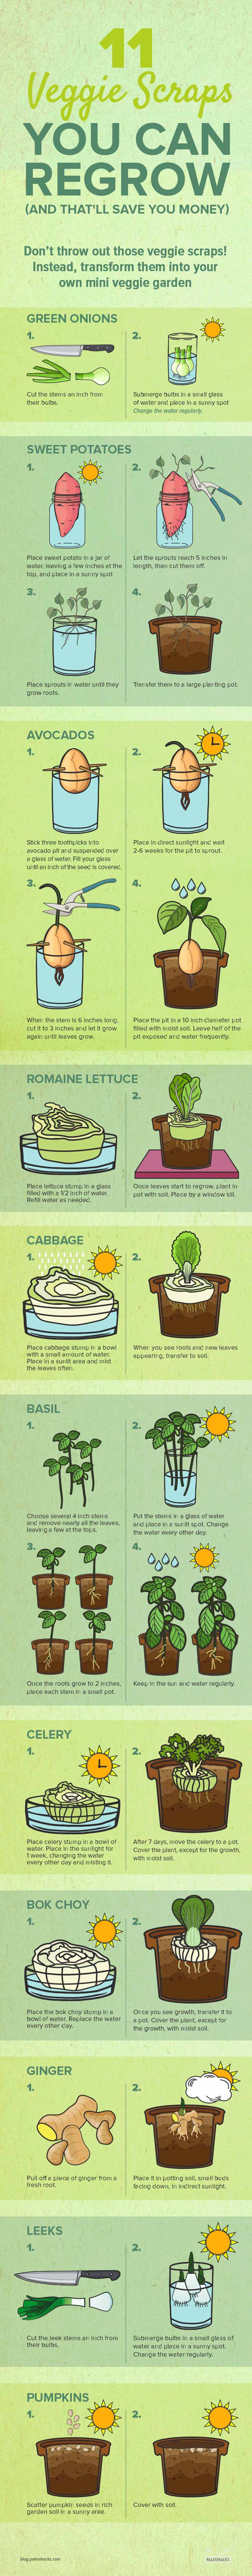 Don’t throw out those veggie scraps! Turns out, you can transform them into your own mini veggie garden. Take a minute to check out the list below.